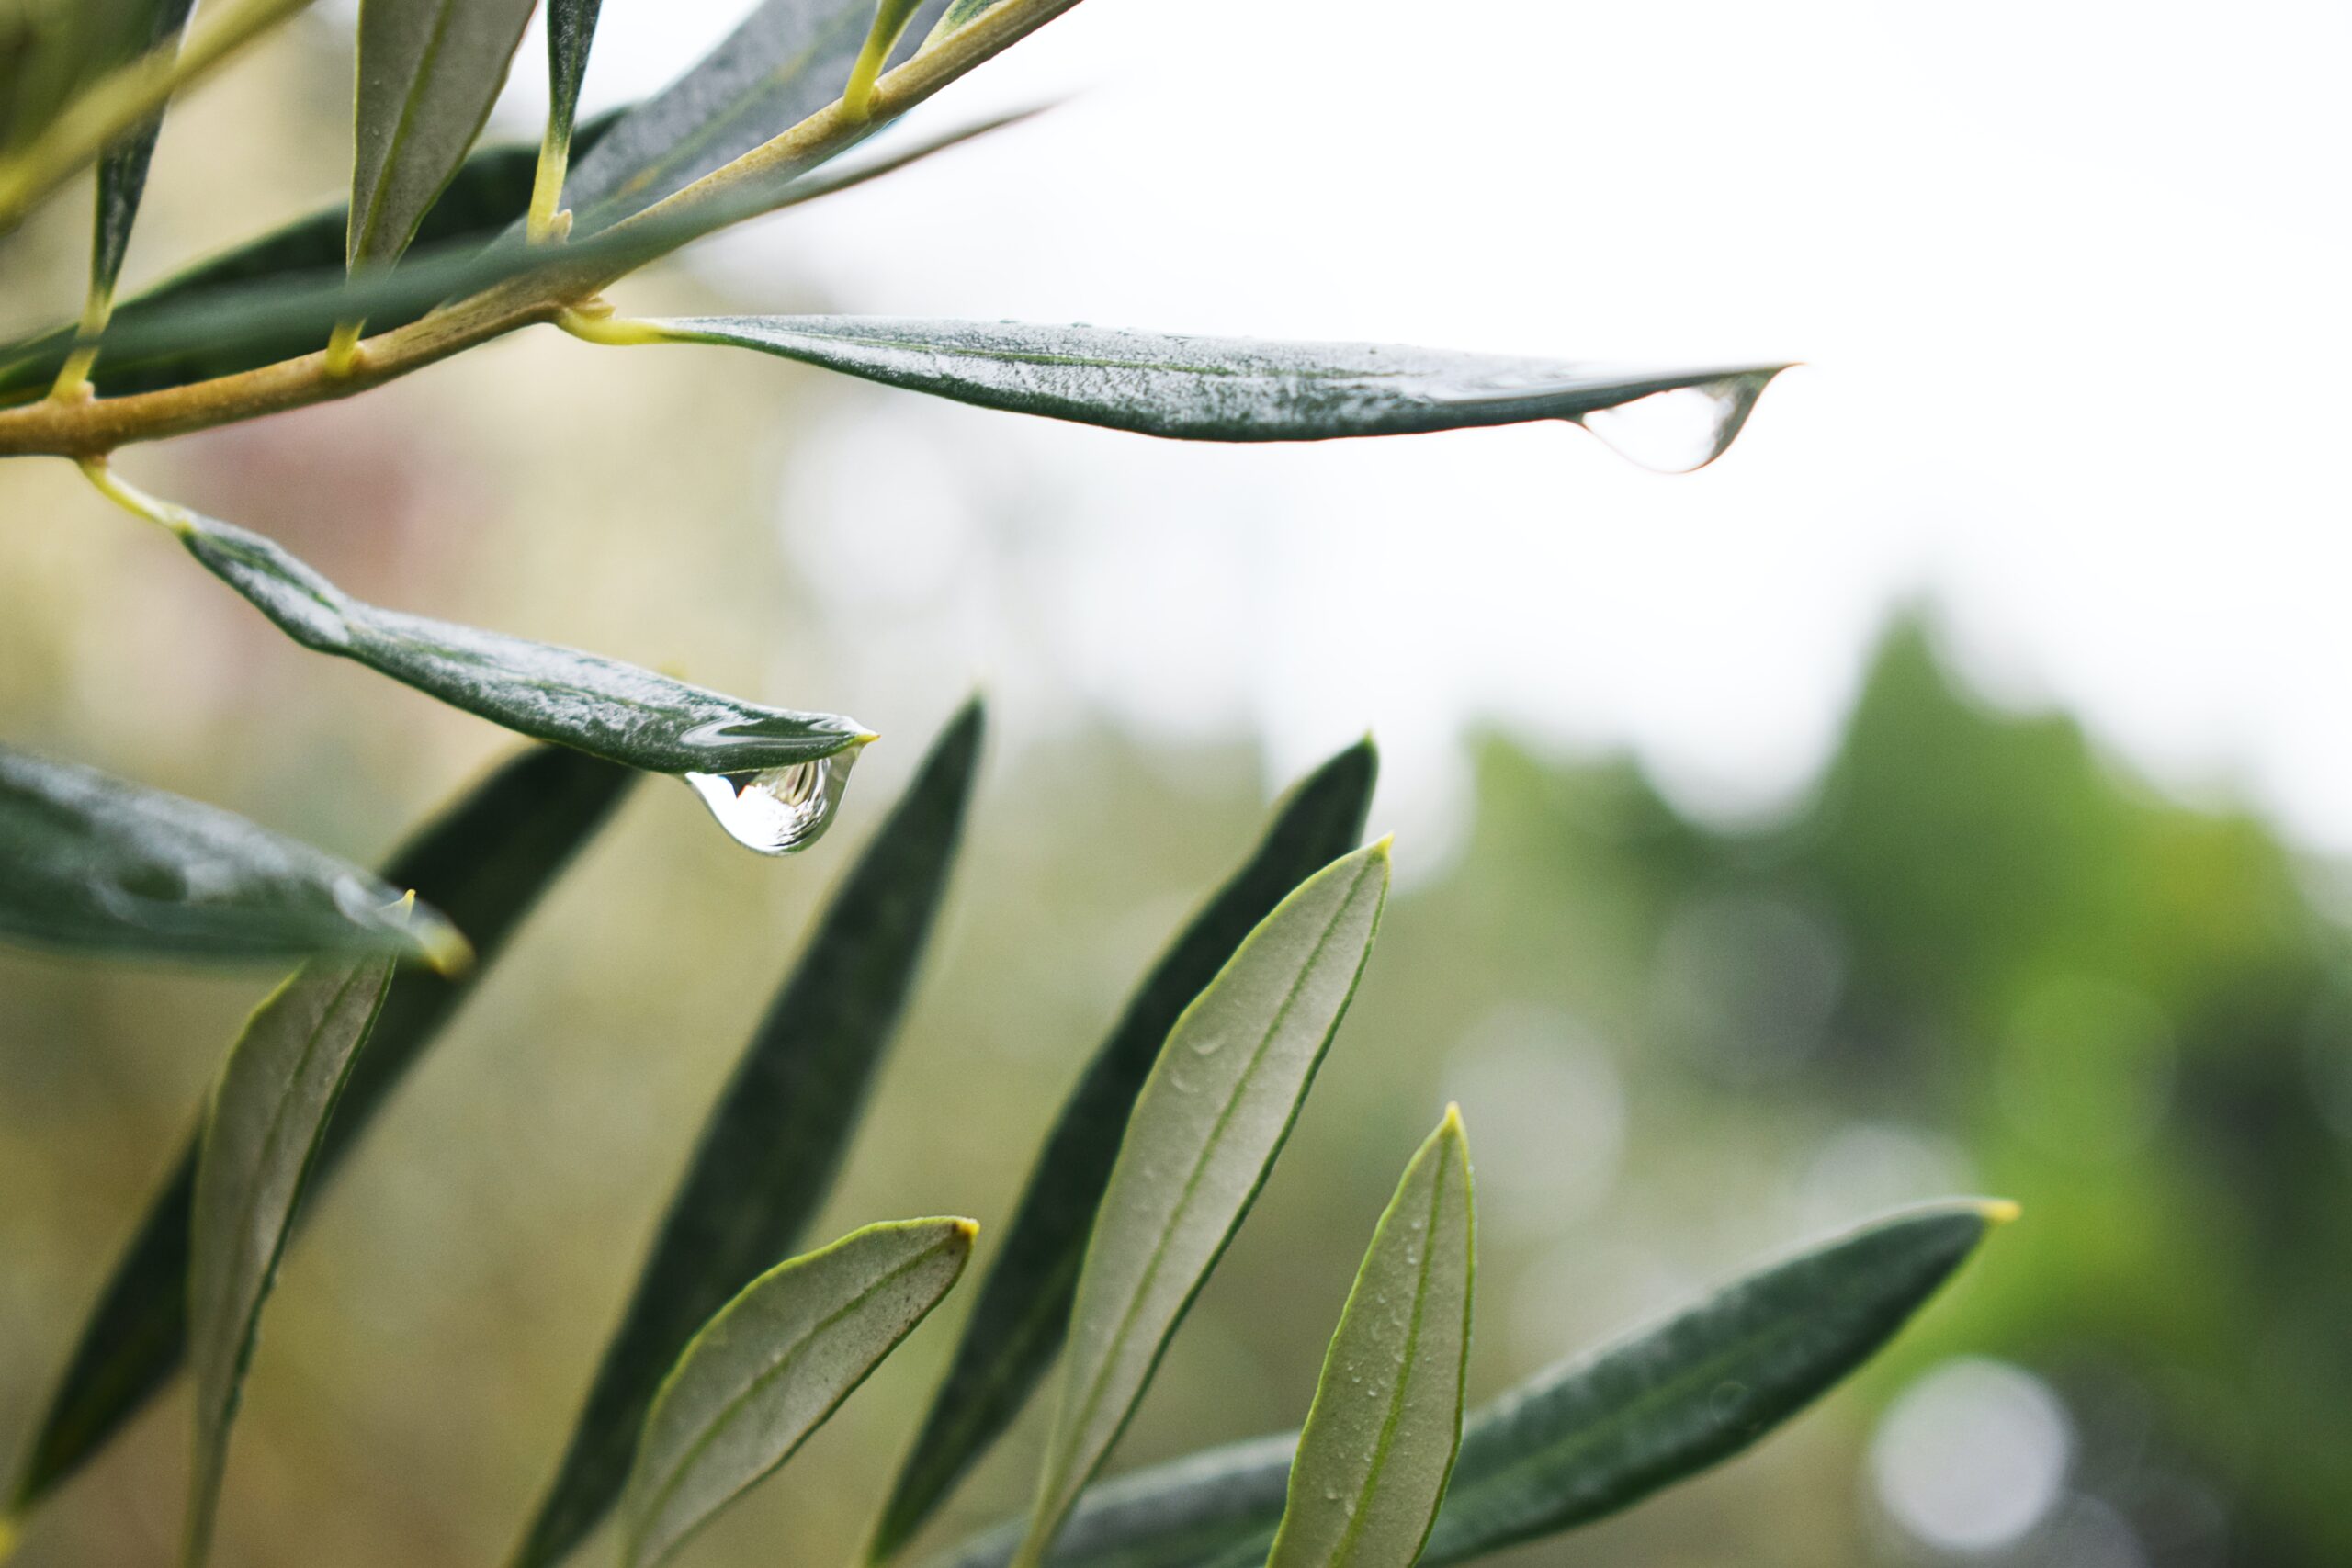 Picture of Olive leaf with raindrop on one leaf. Herbs to boost immune and blog about how to prevent colds and flu and stay well this winter.